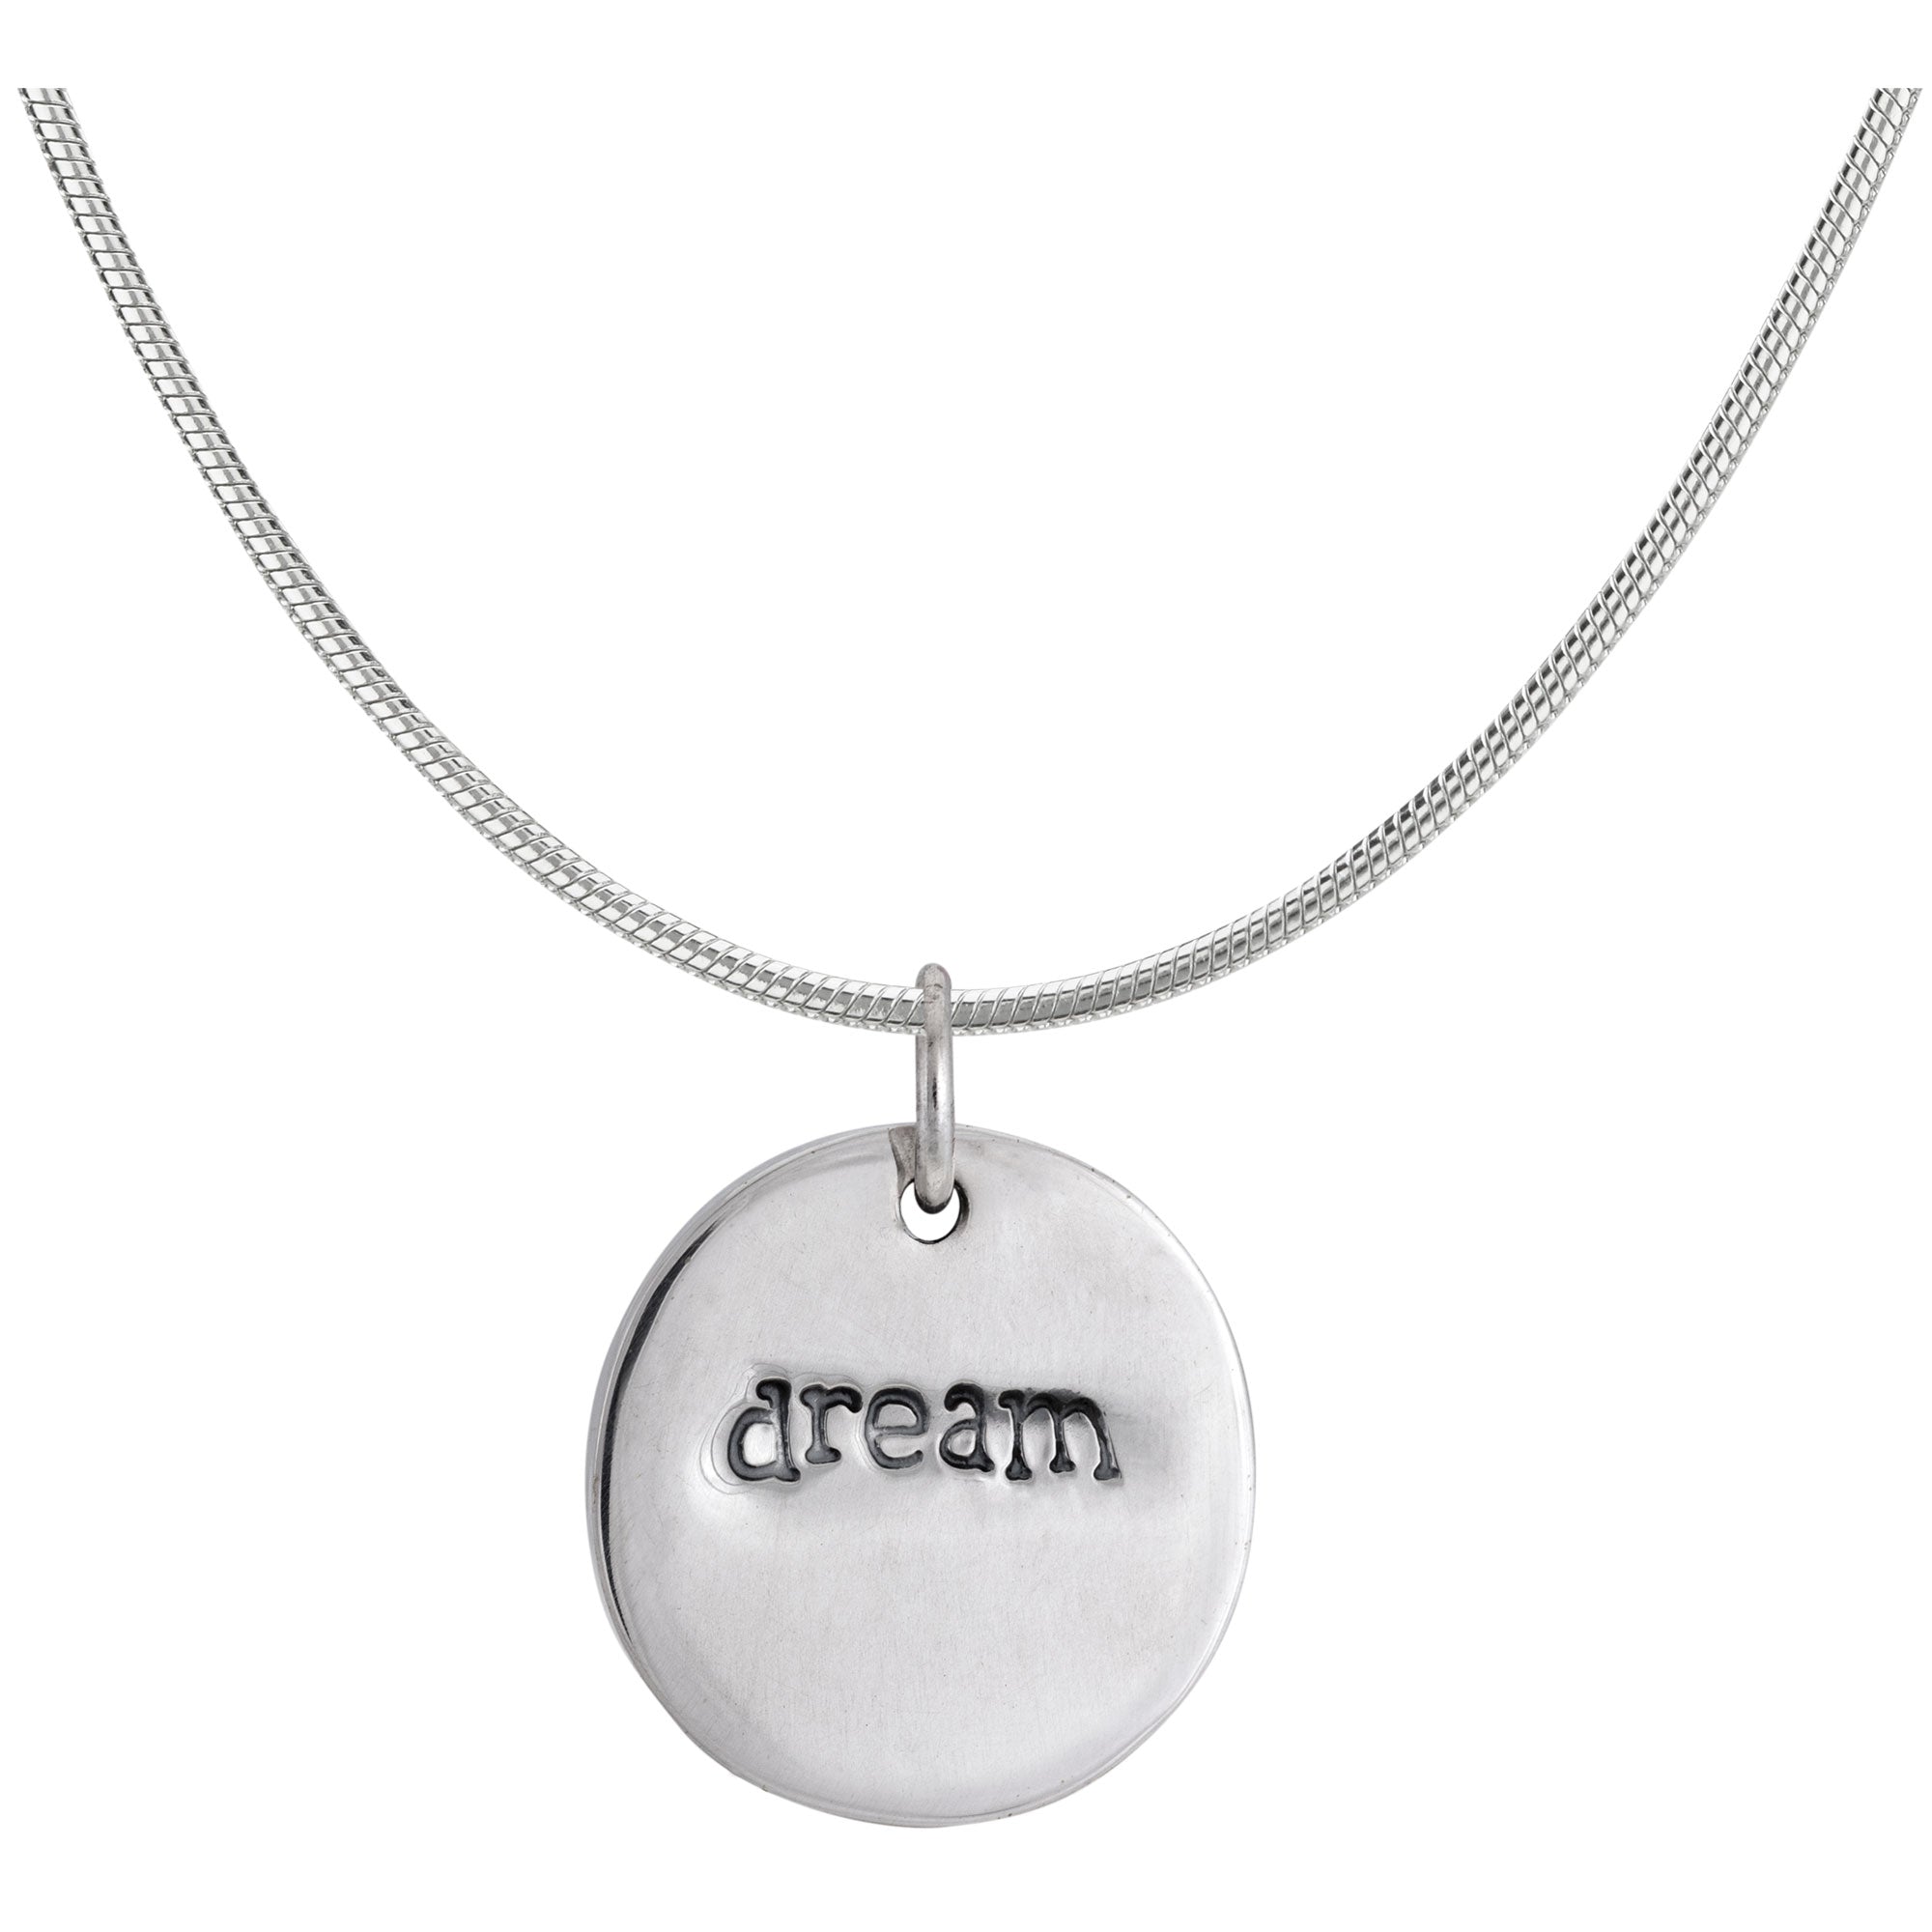 Believe Dream Double Sided Sterling Necklace - With Snake Chain